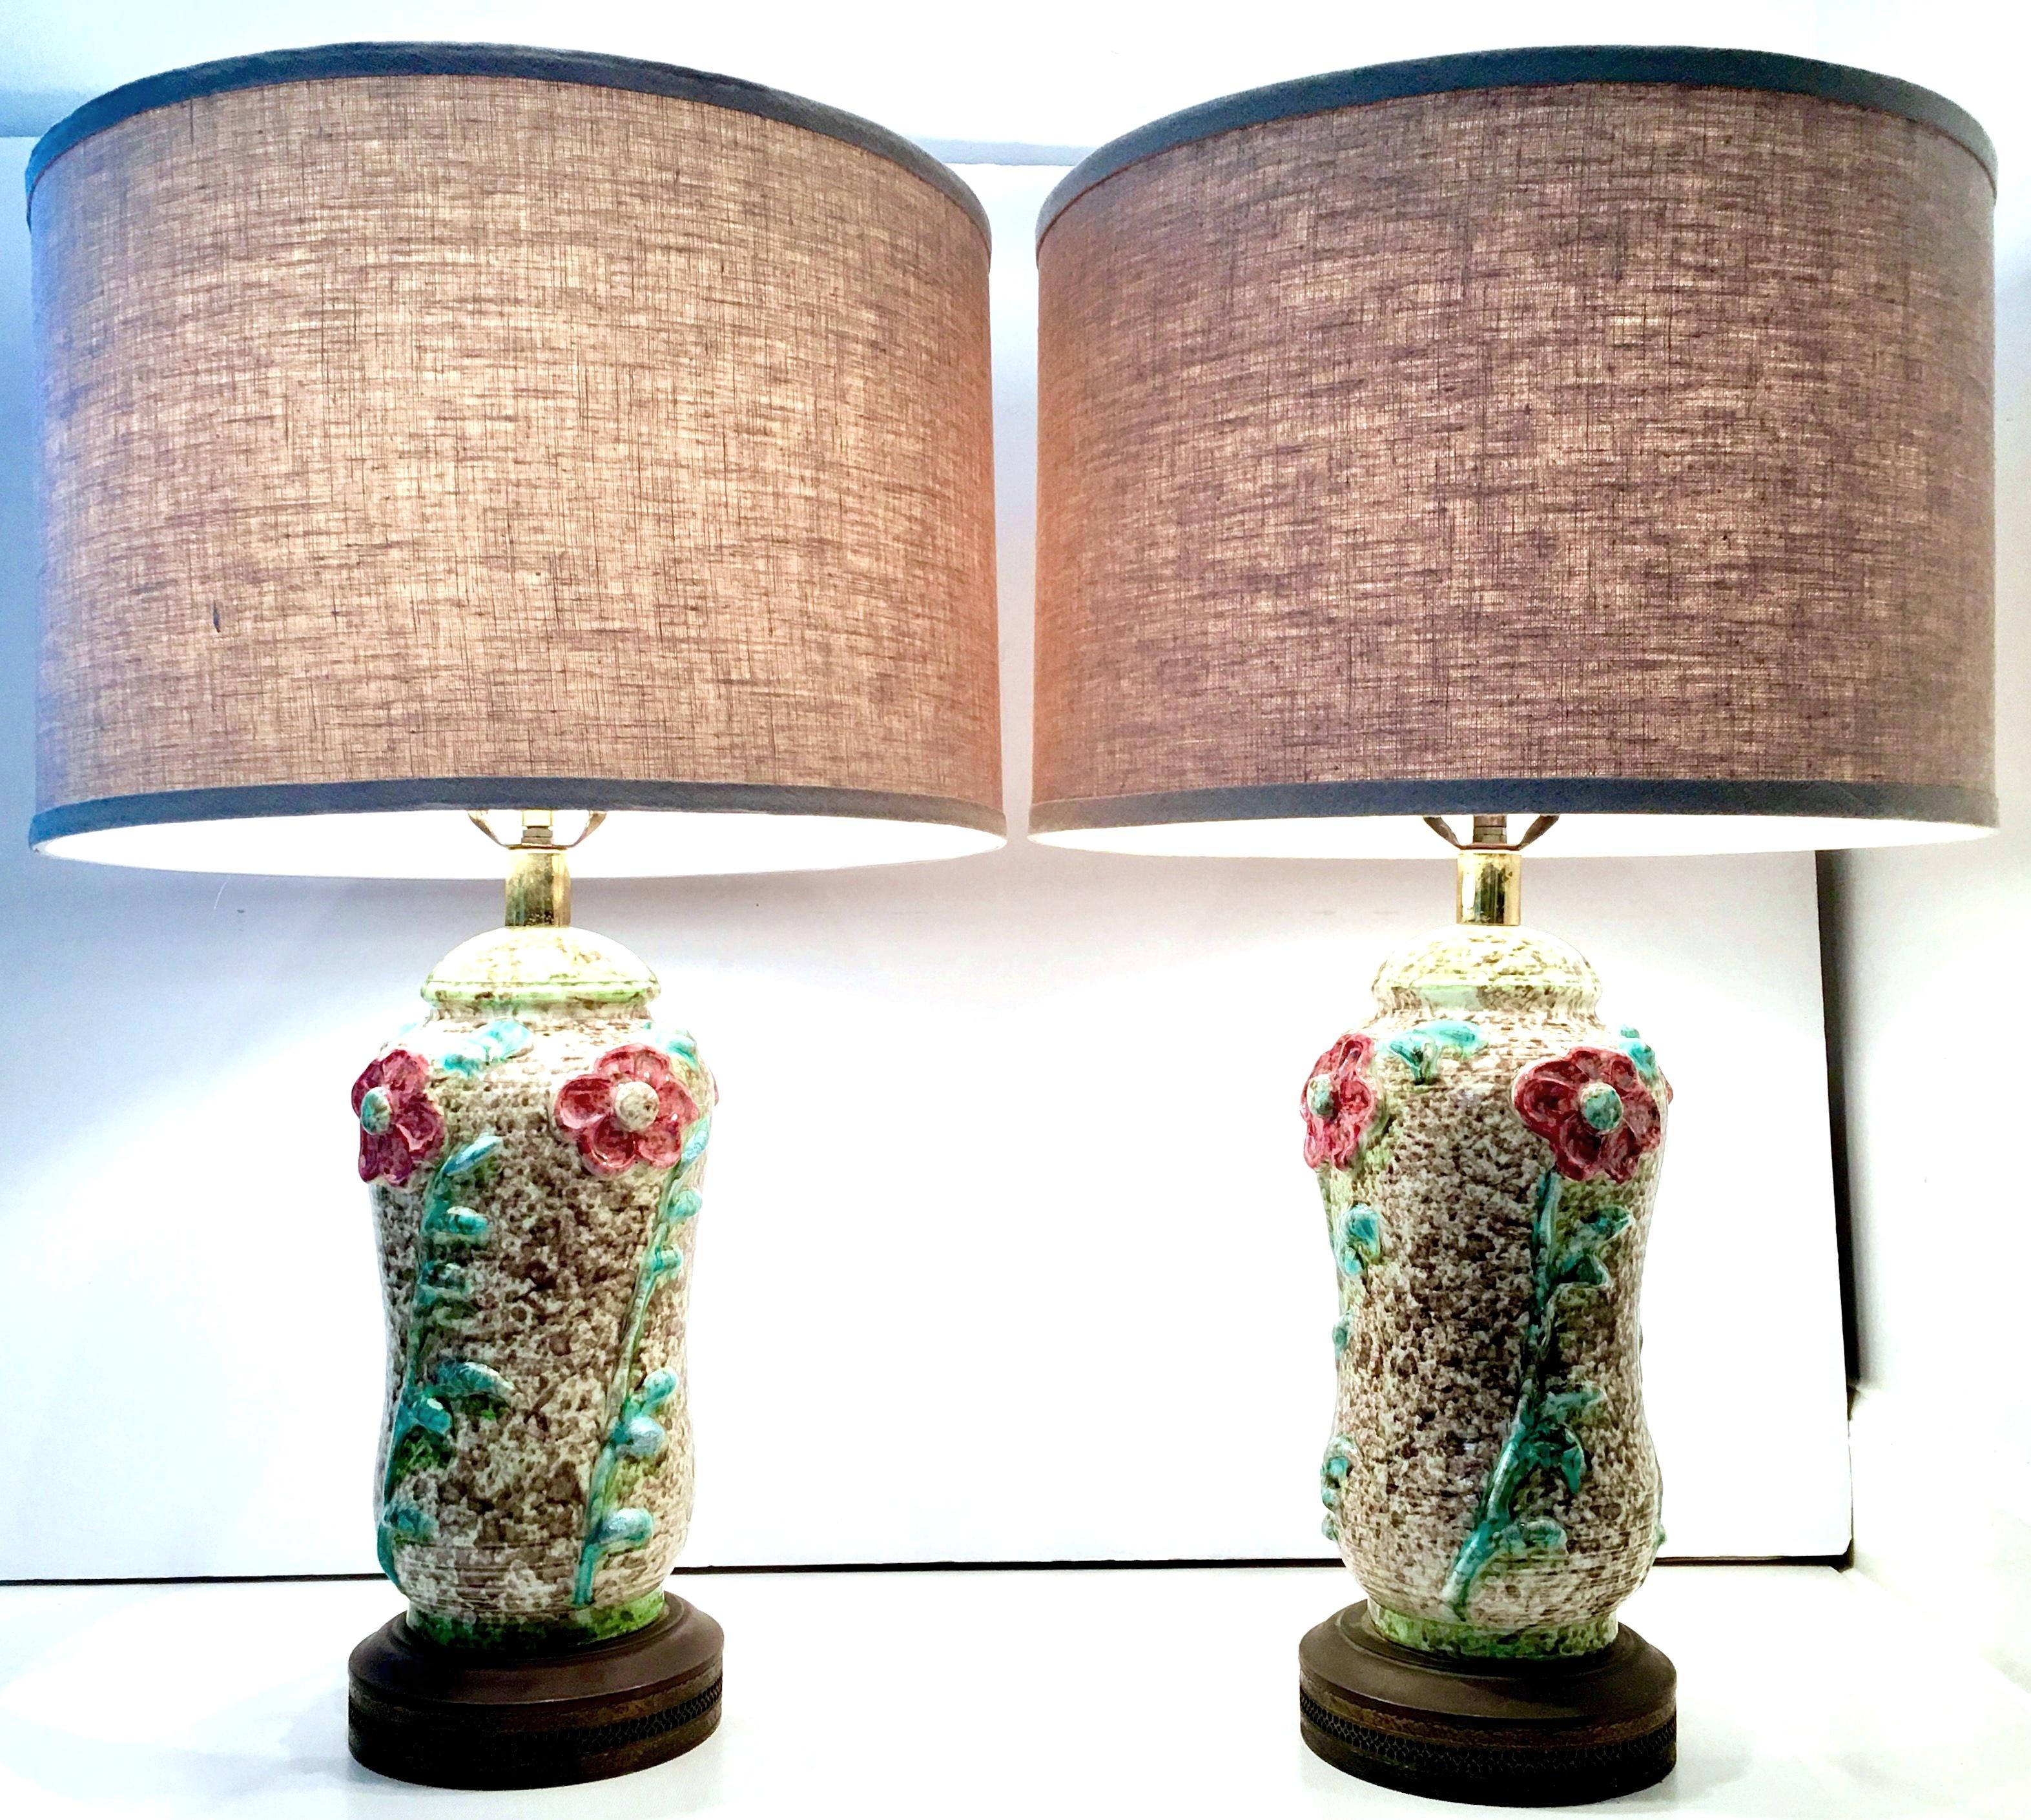 Art Nouveau Mid-20th Century Pair of Ceramic Glaze and Gilt Brass Floral Table Lamps For Sale